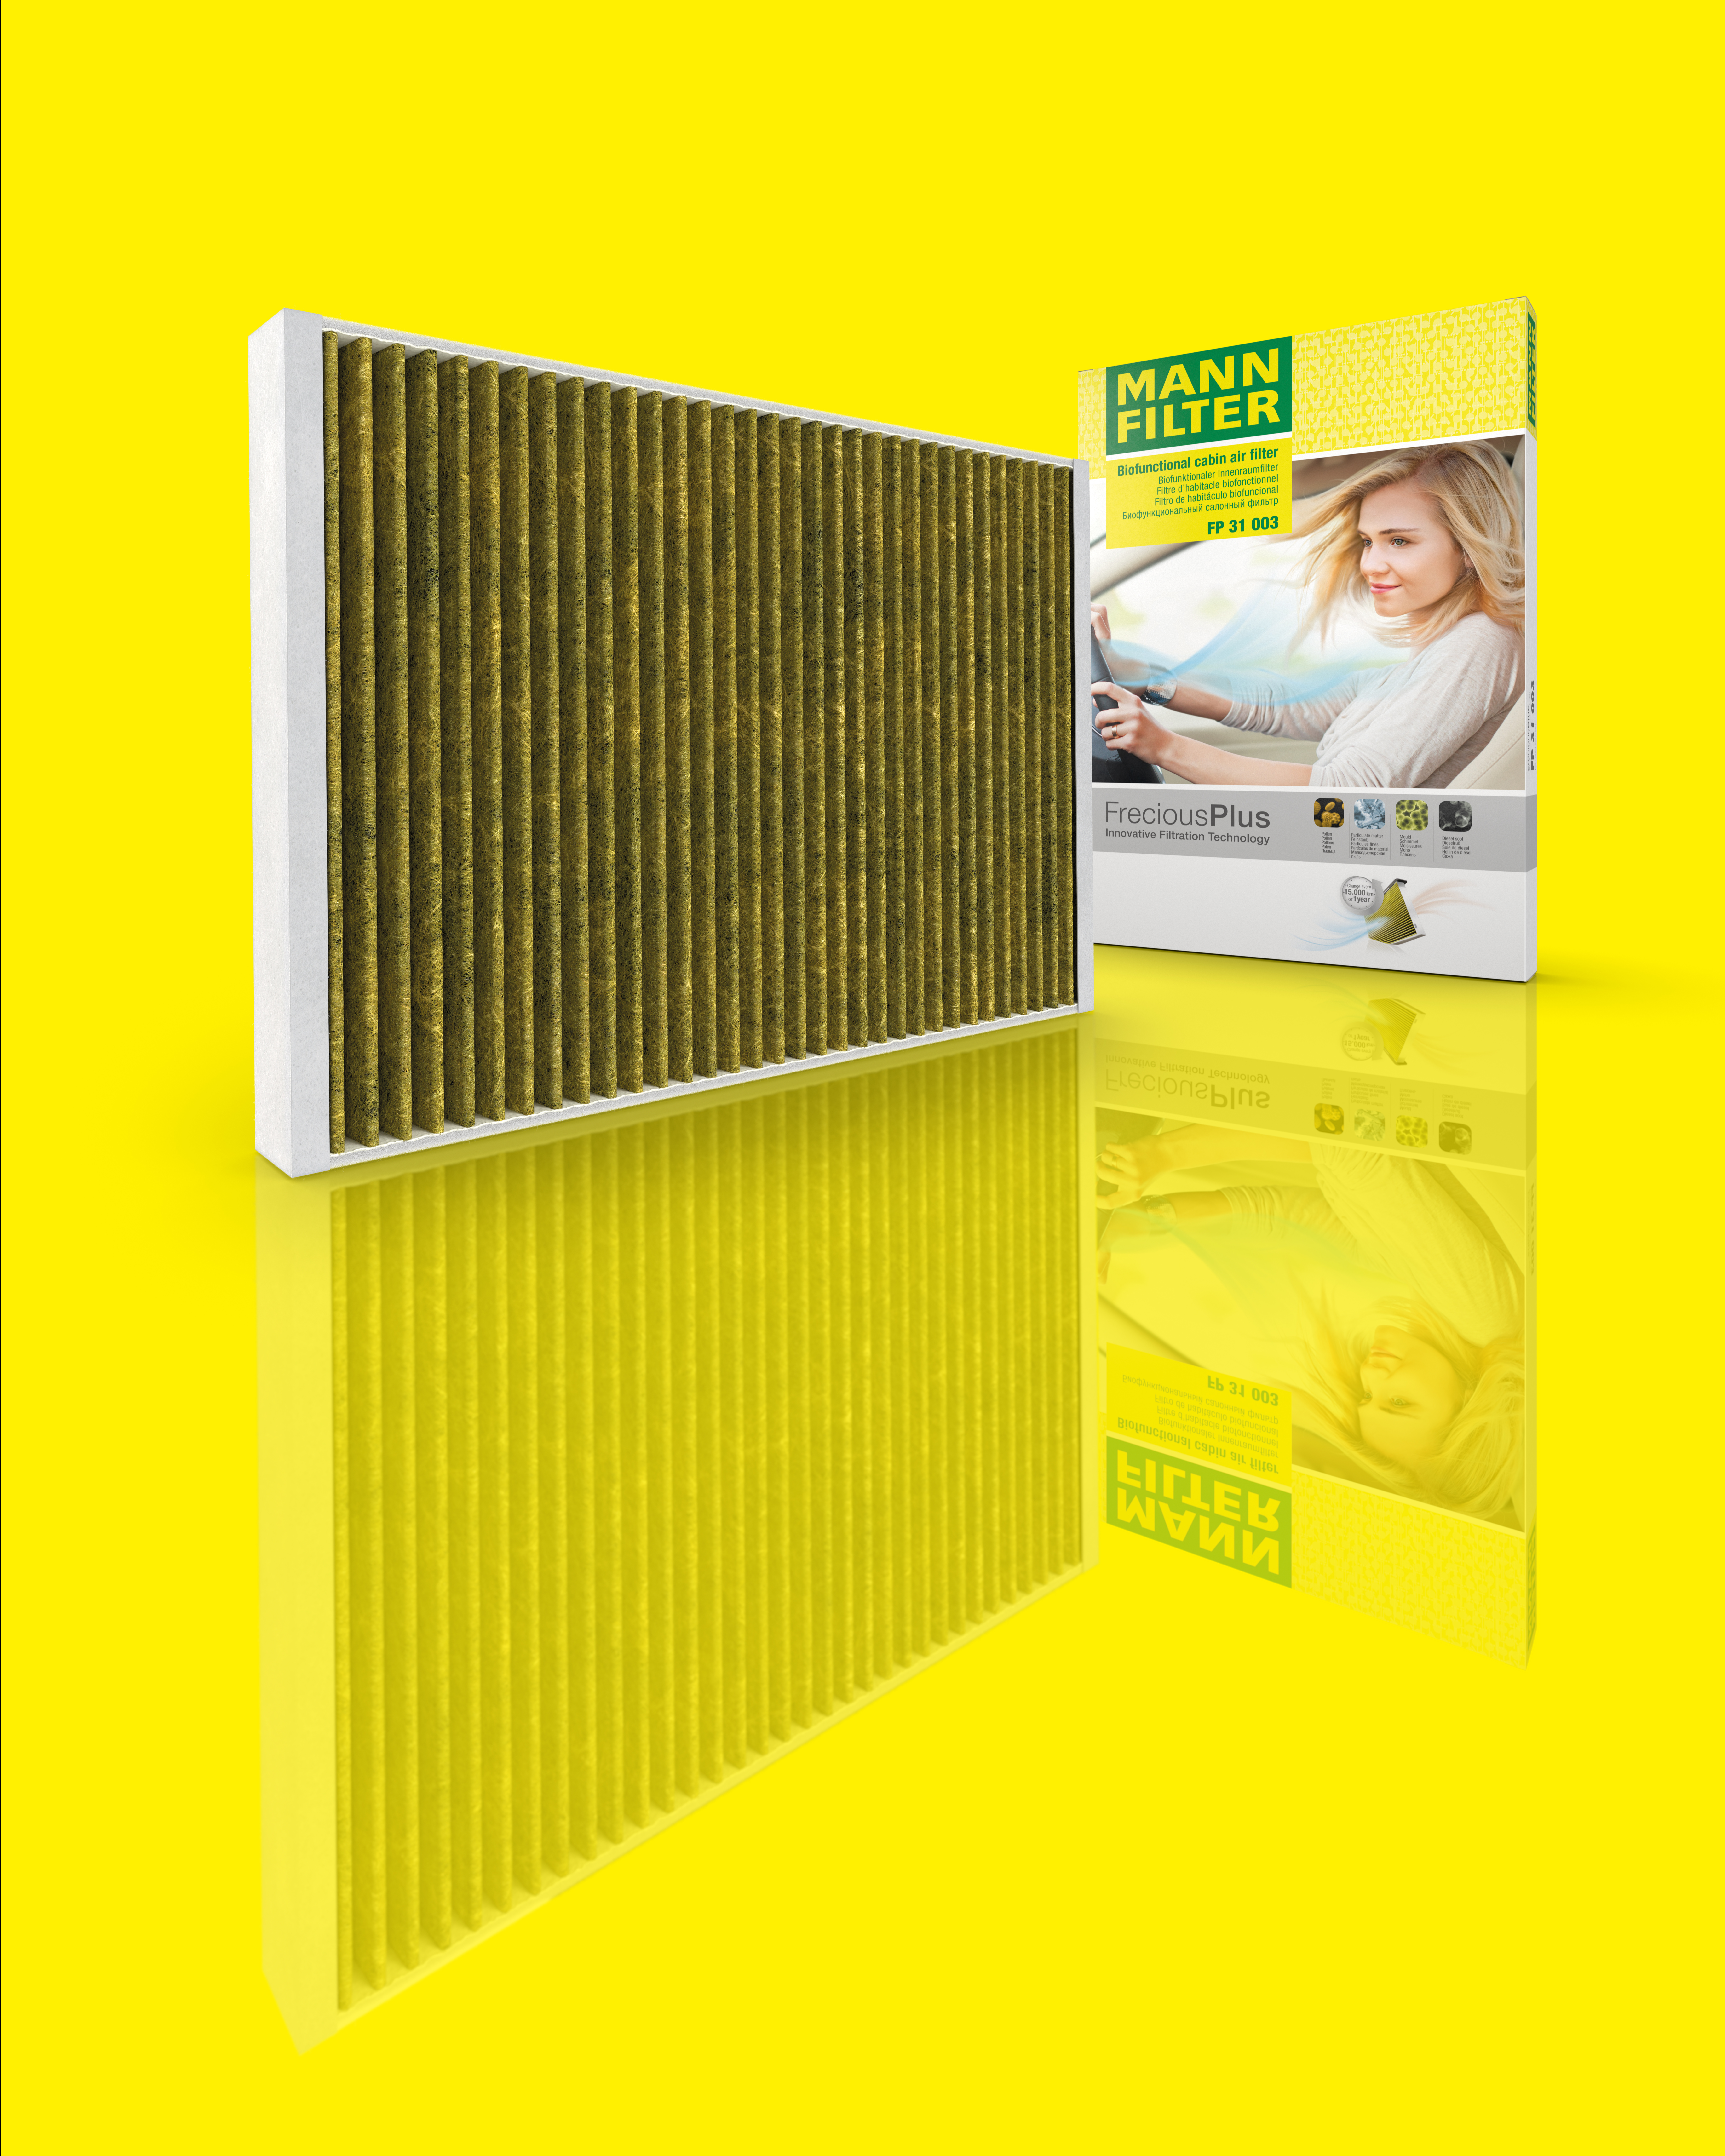 An elongated fluted filter against yellow background and reflective bottom next to the package